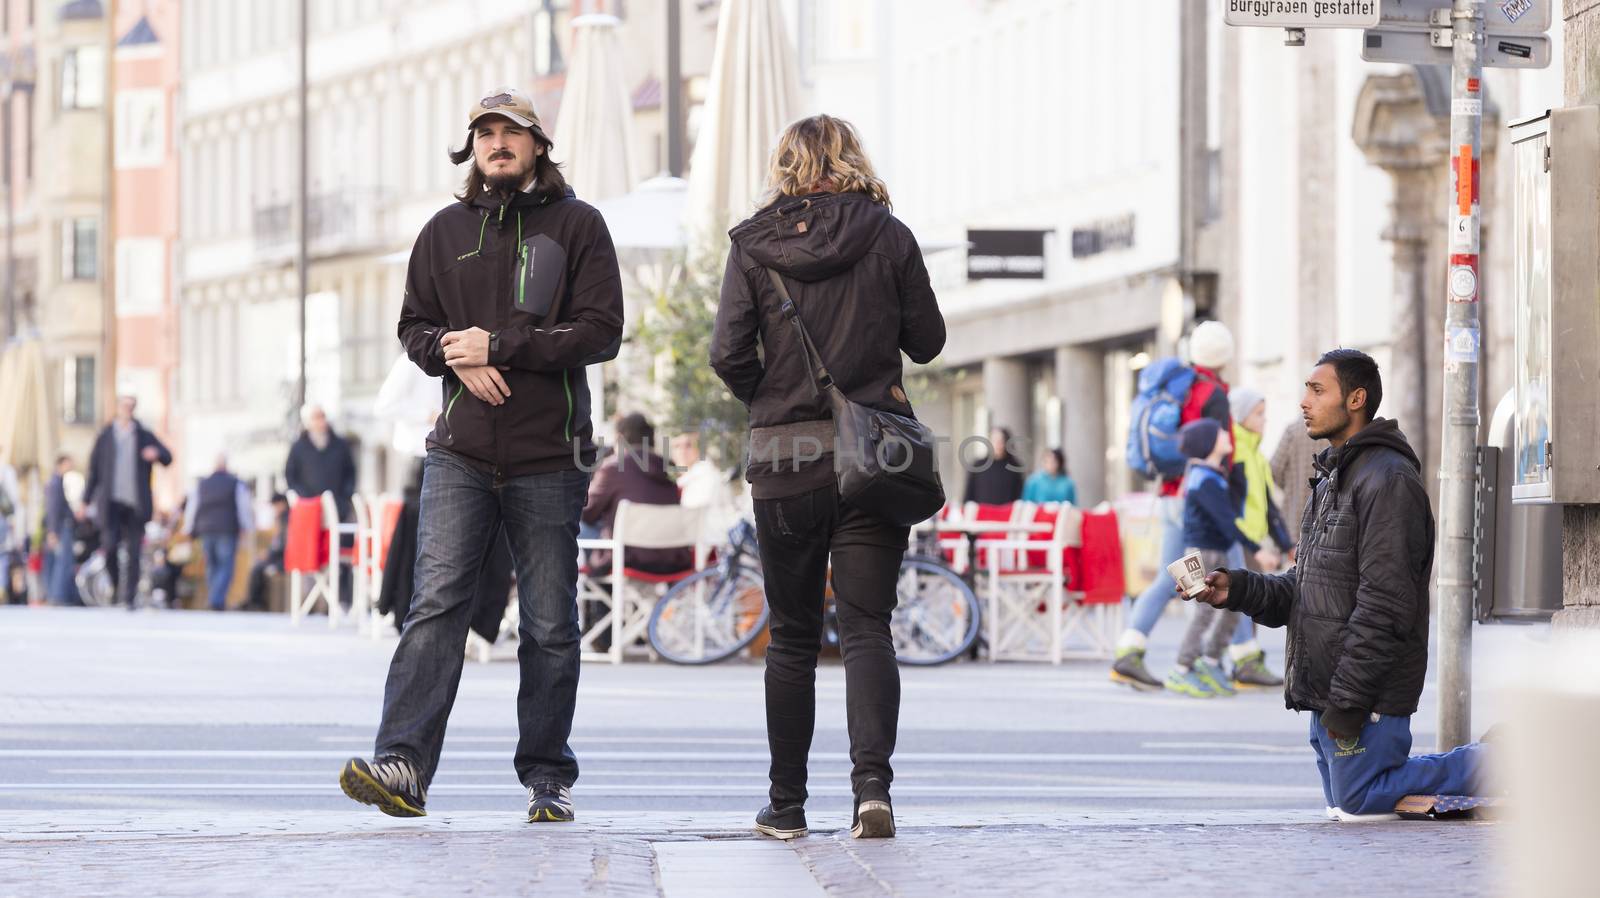 INNSBRUCK, AUSTRIA – NOVEMBER 1st 2015: Refugee begging for help in the streets of Innsbruck with people walking by.